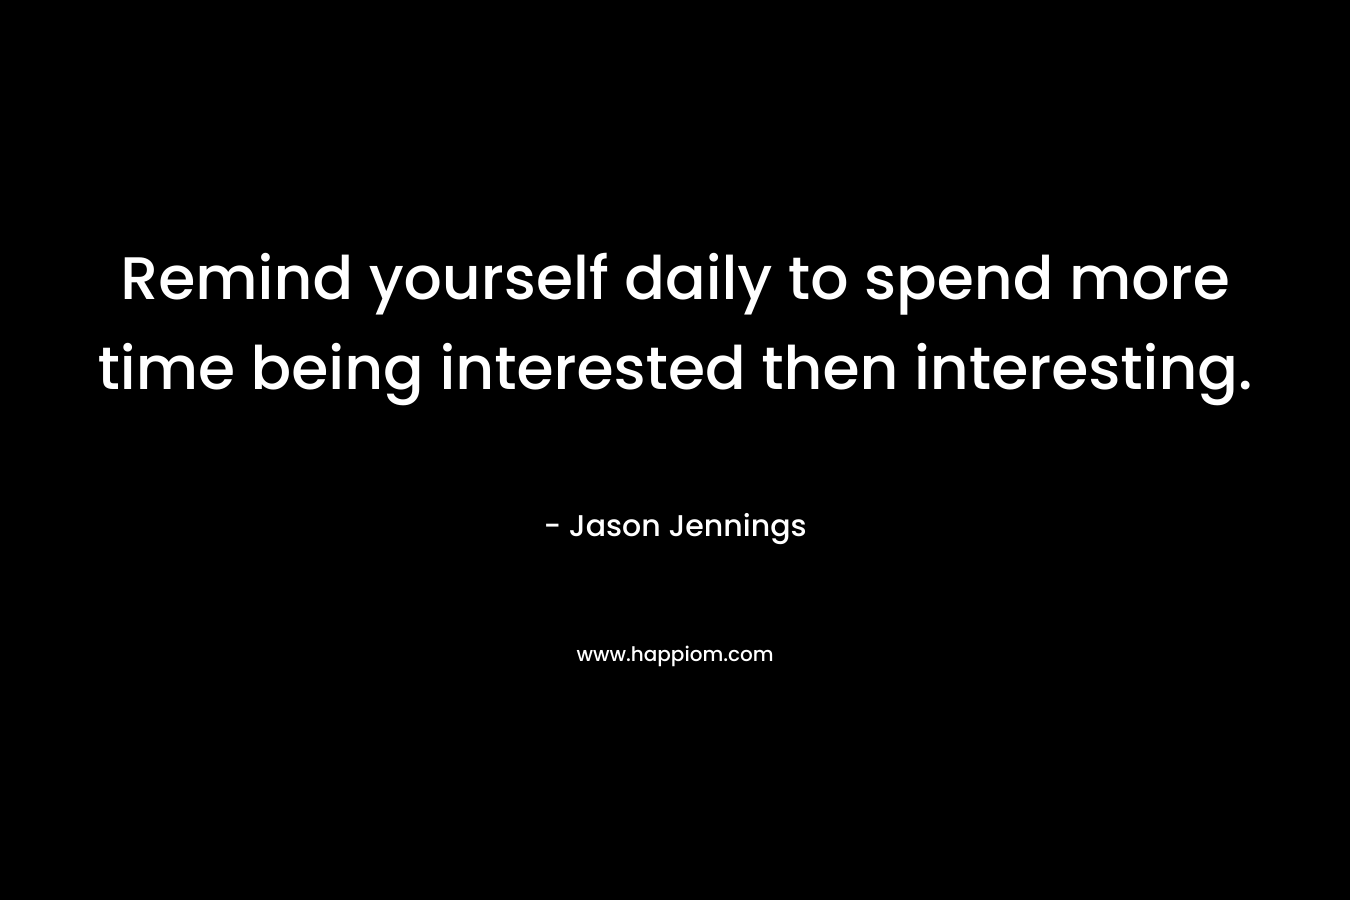 Remind yourself daily to spend more time being interested then interesting. – Jason Jennings